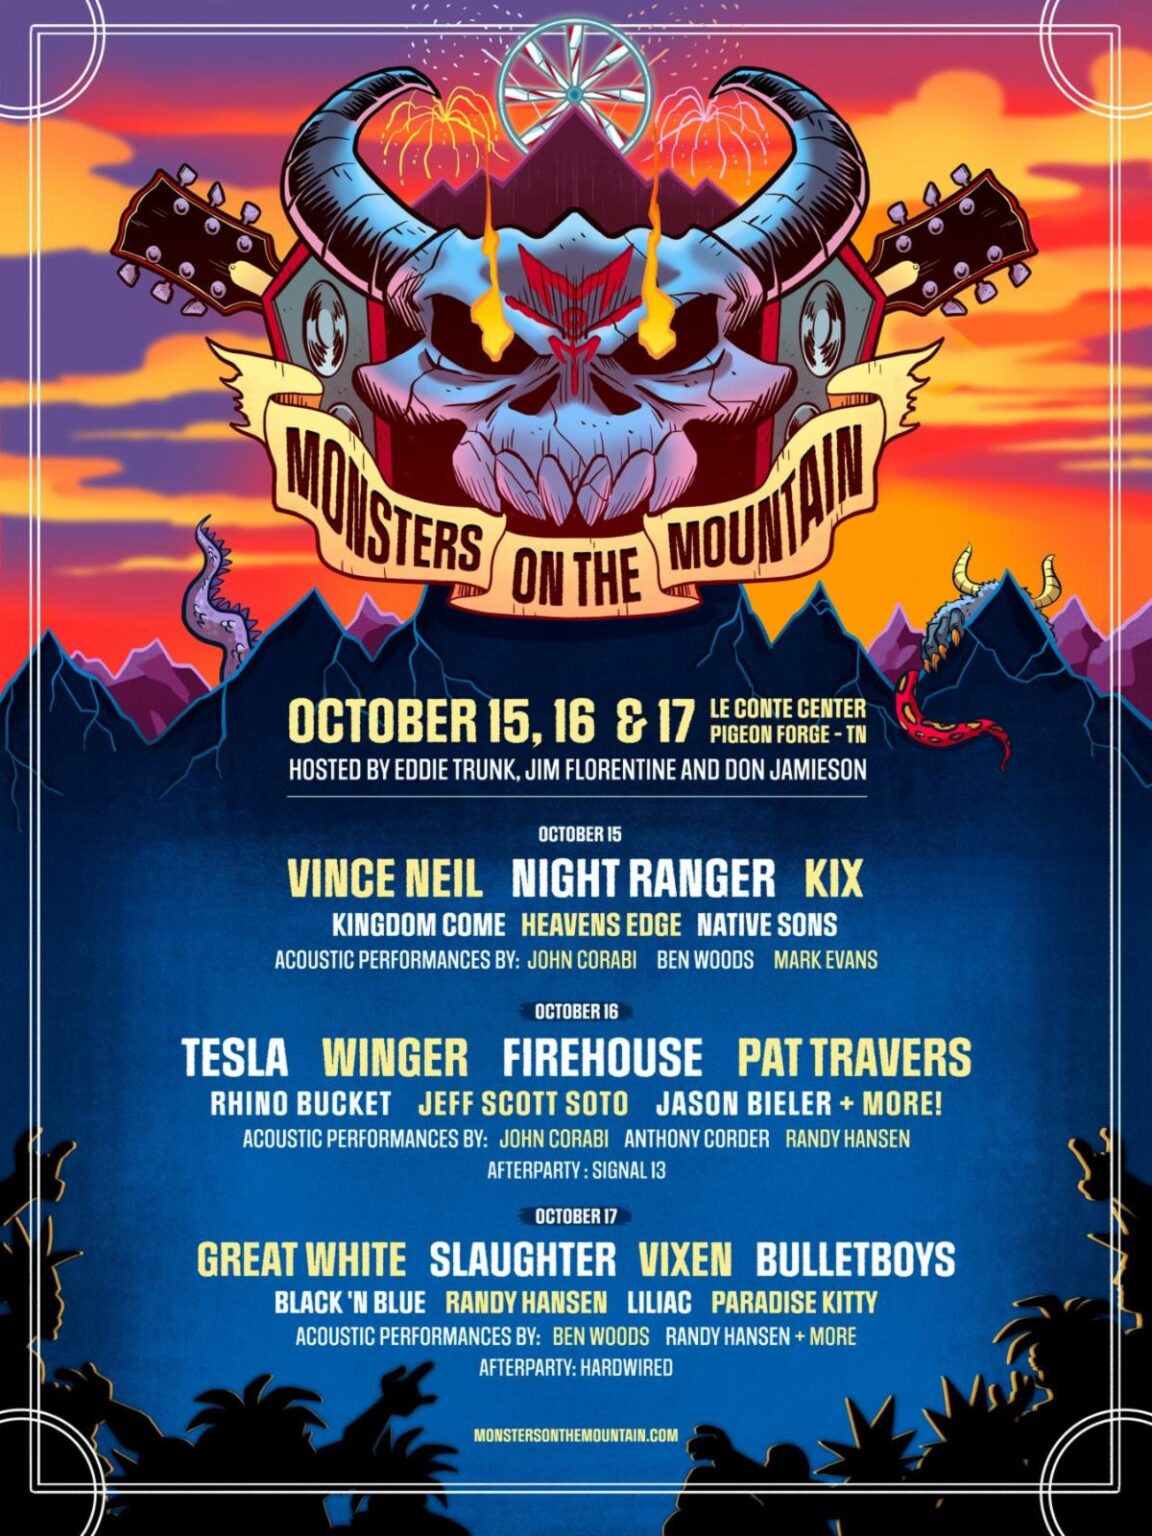 MONSTERS ON THE MOUNTAIN ANNOUNCES DAILY LINEUPS - The Rockpit